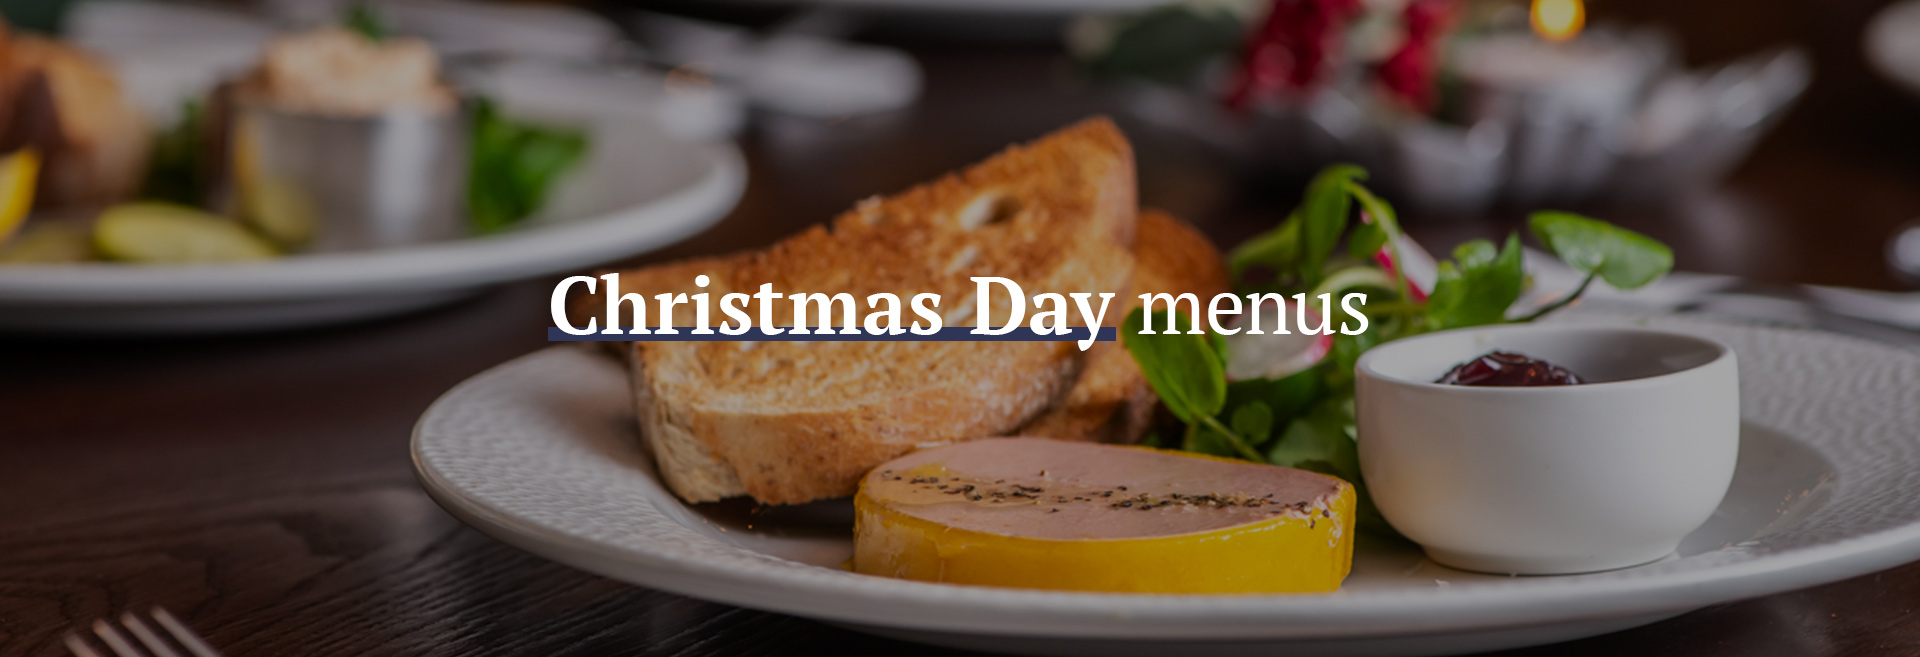 Christmas Day Menu at The Prince of Wales Feathers